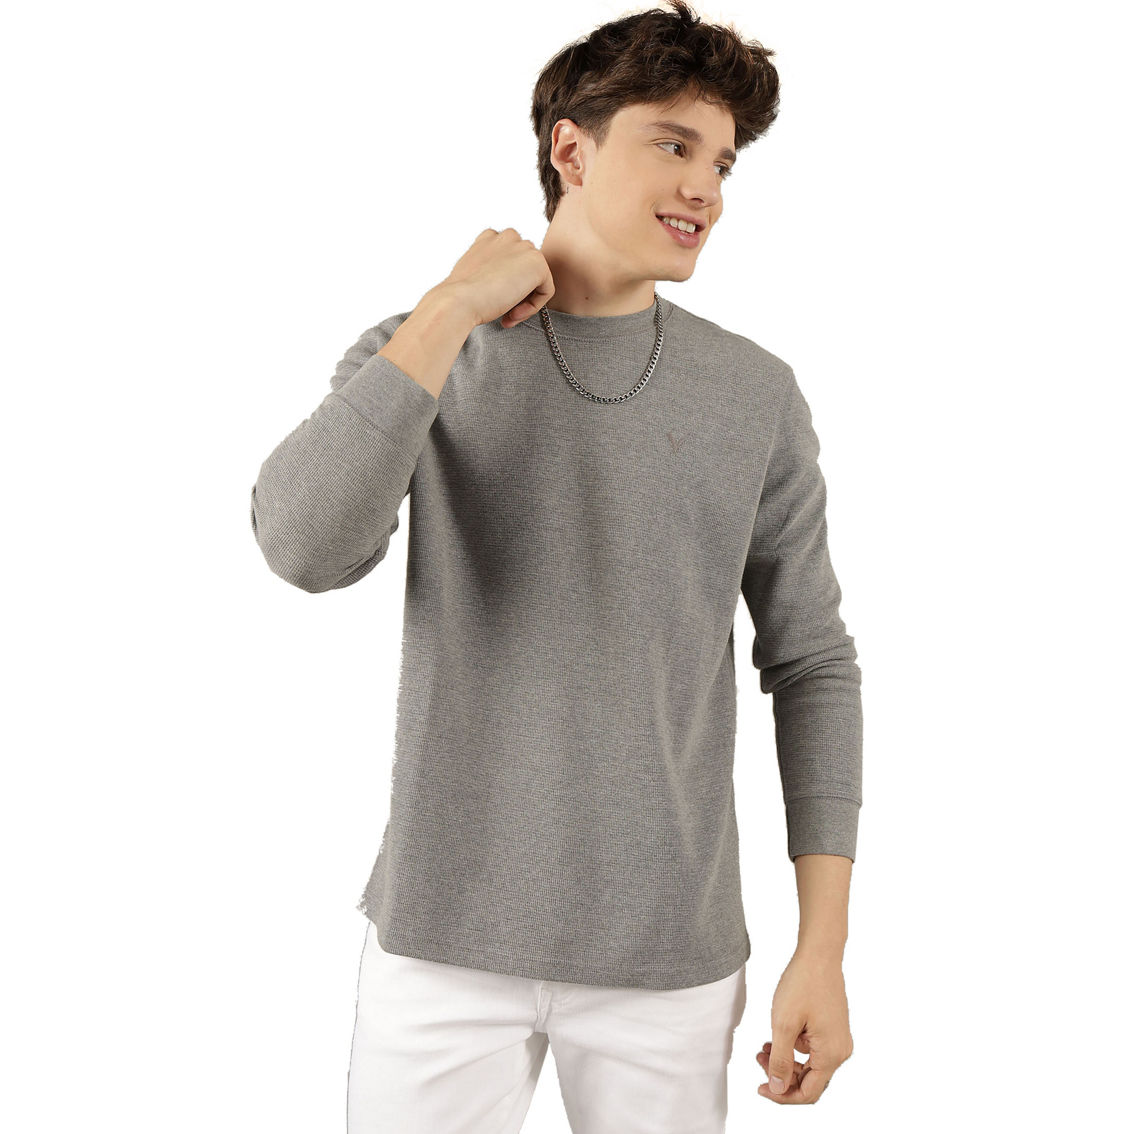 American Eagle Thermal Top | Shirts | Clothing & Accessories | Shop The ...